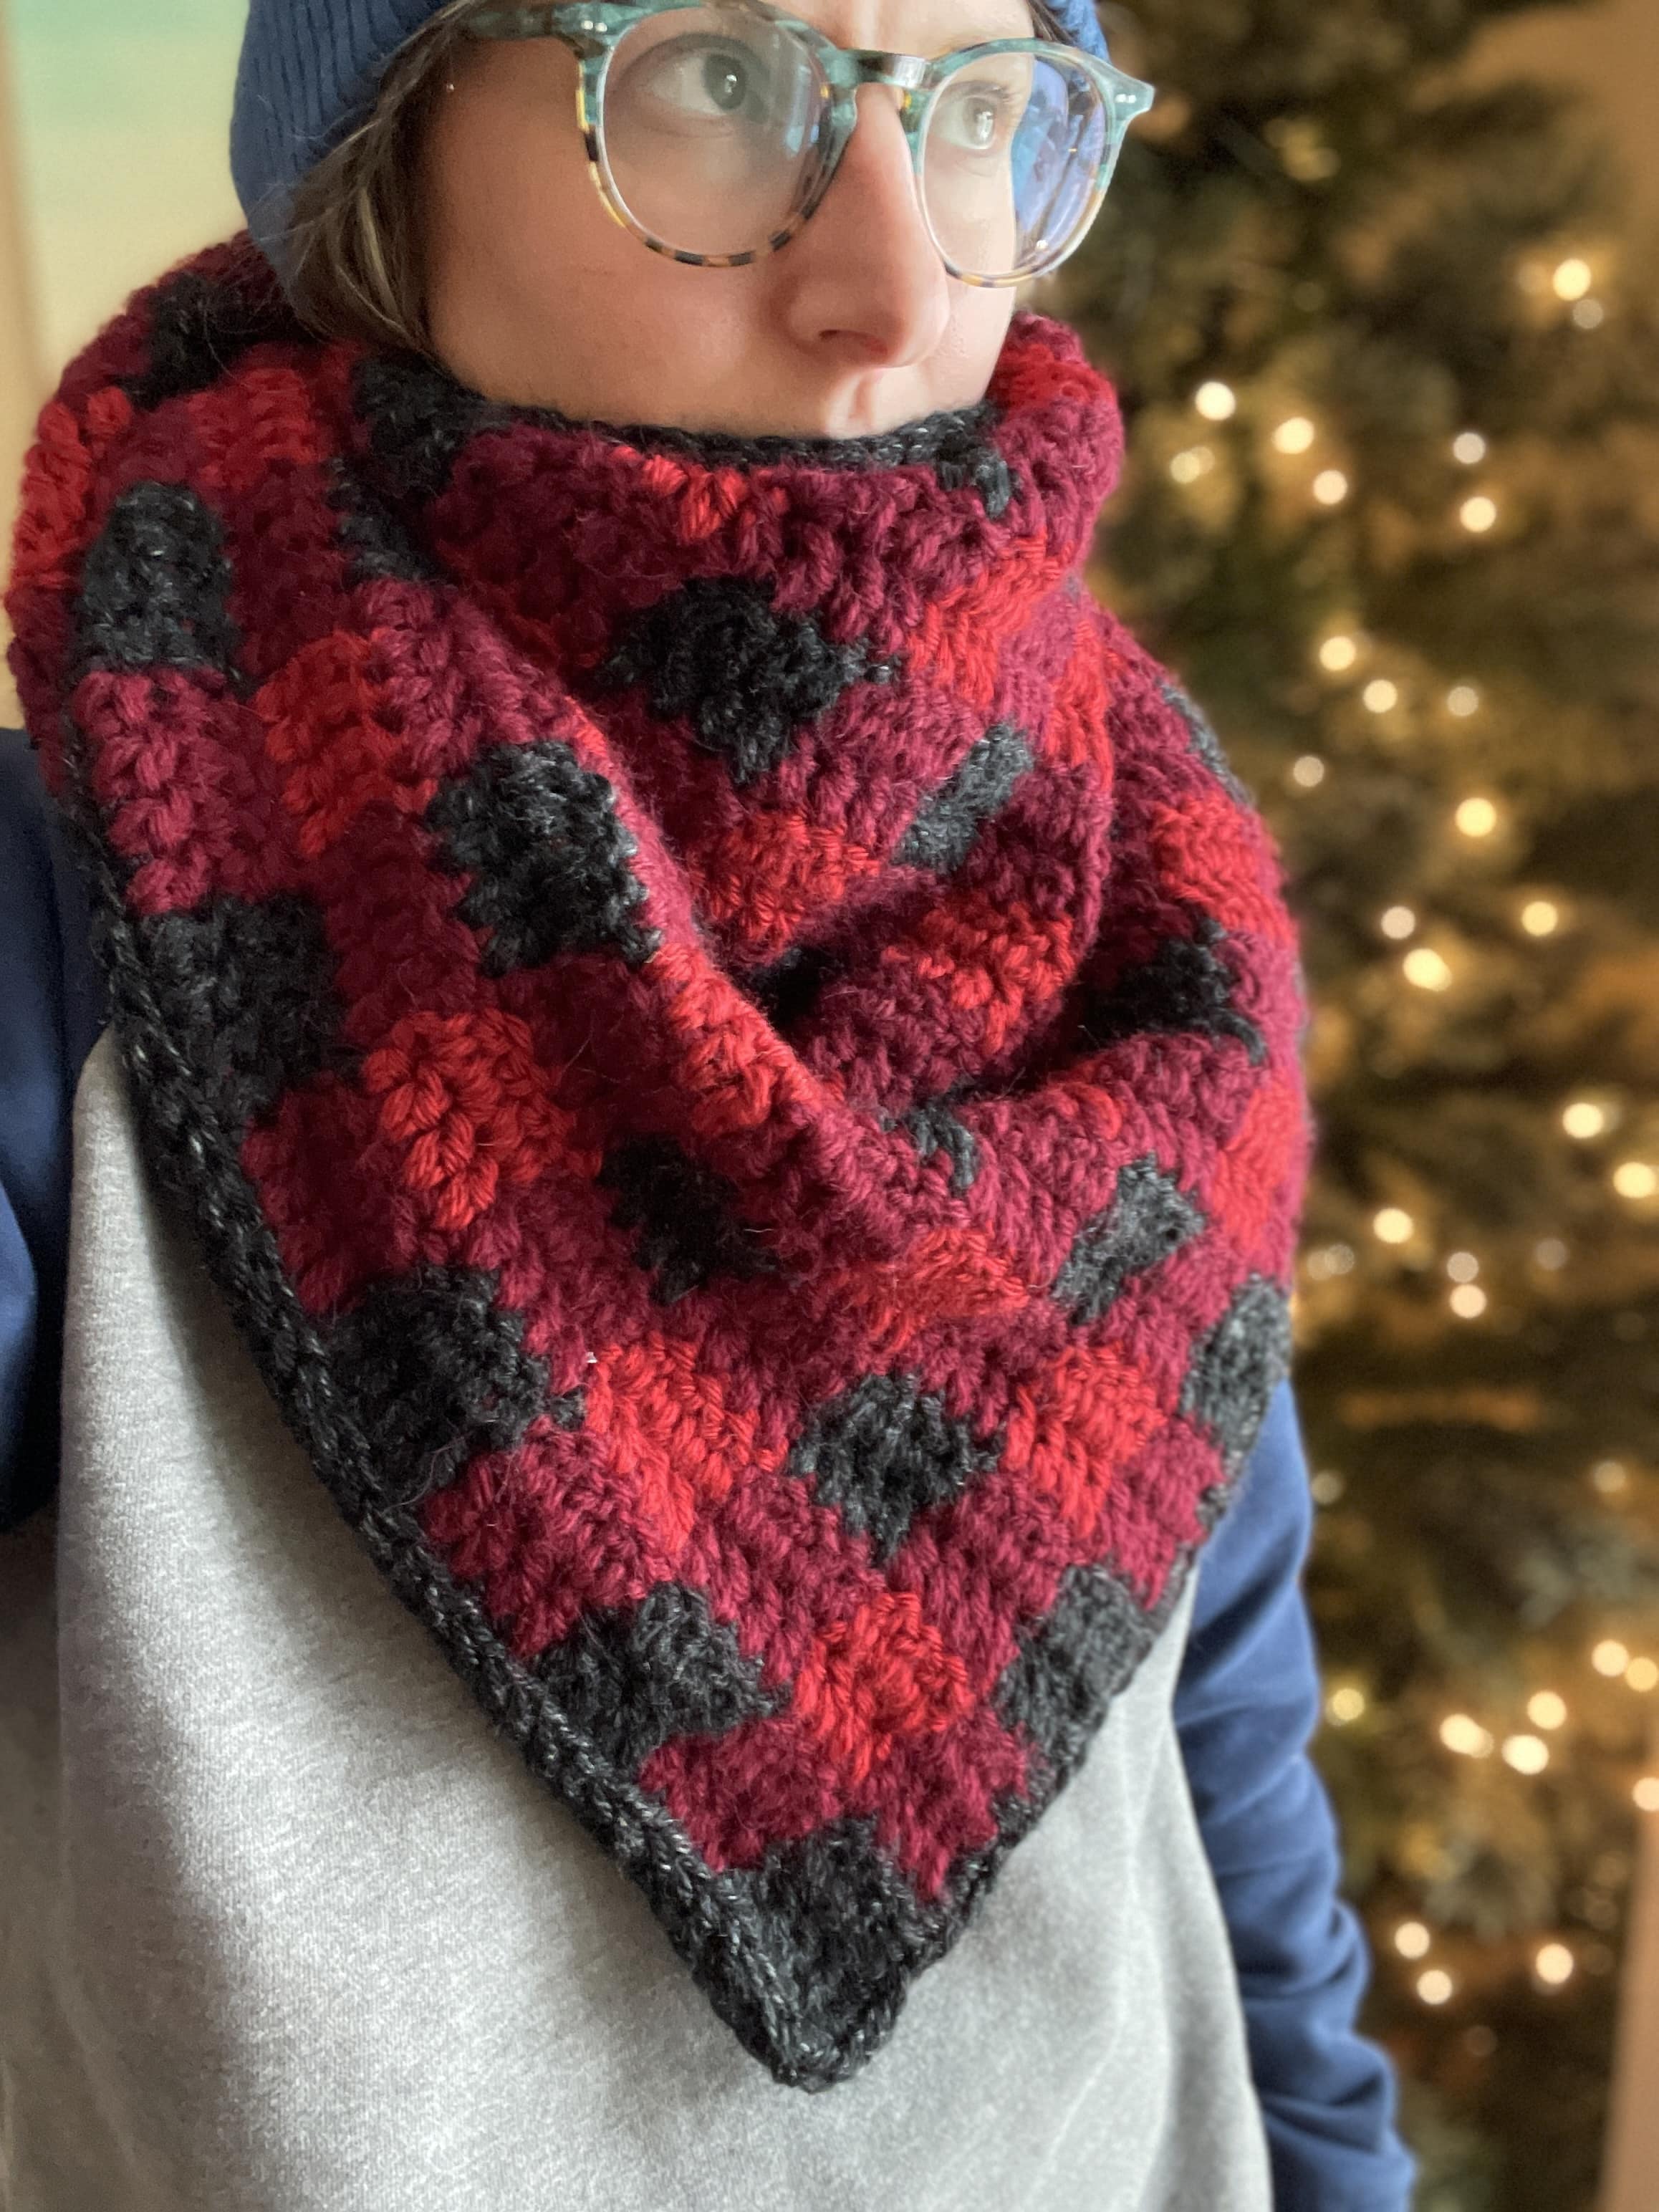 Make a Chunky Crochet Plaid Triangle Scarf – A Fall- Approved Cozy Pattern